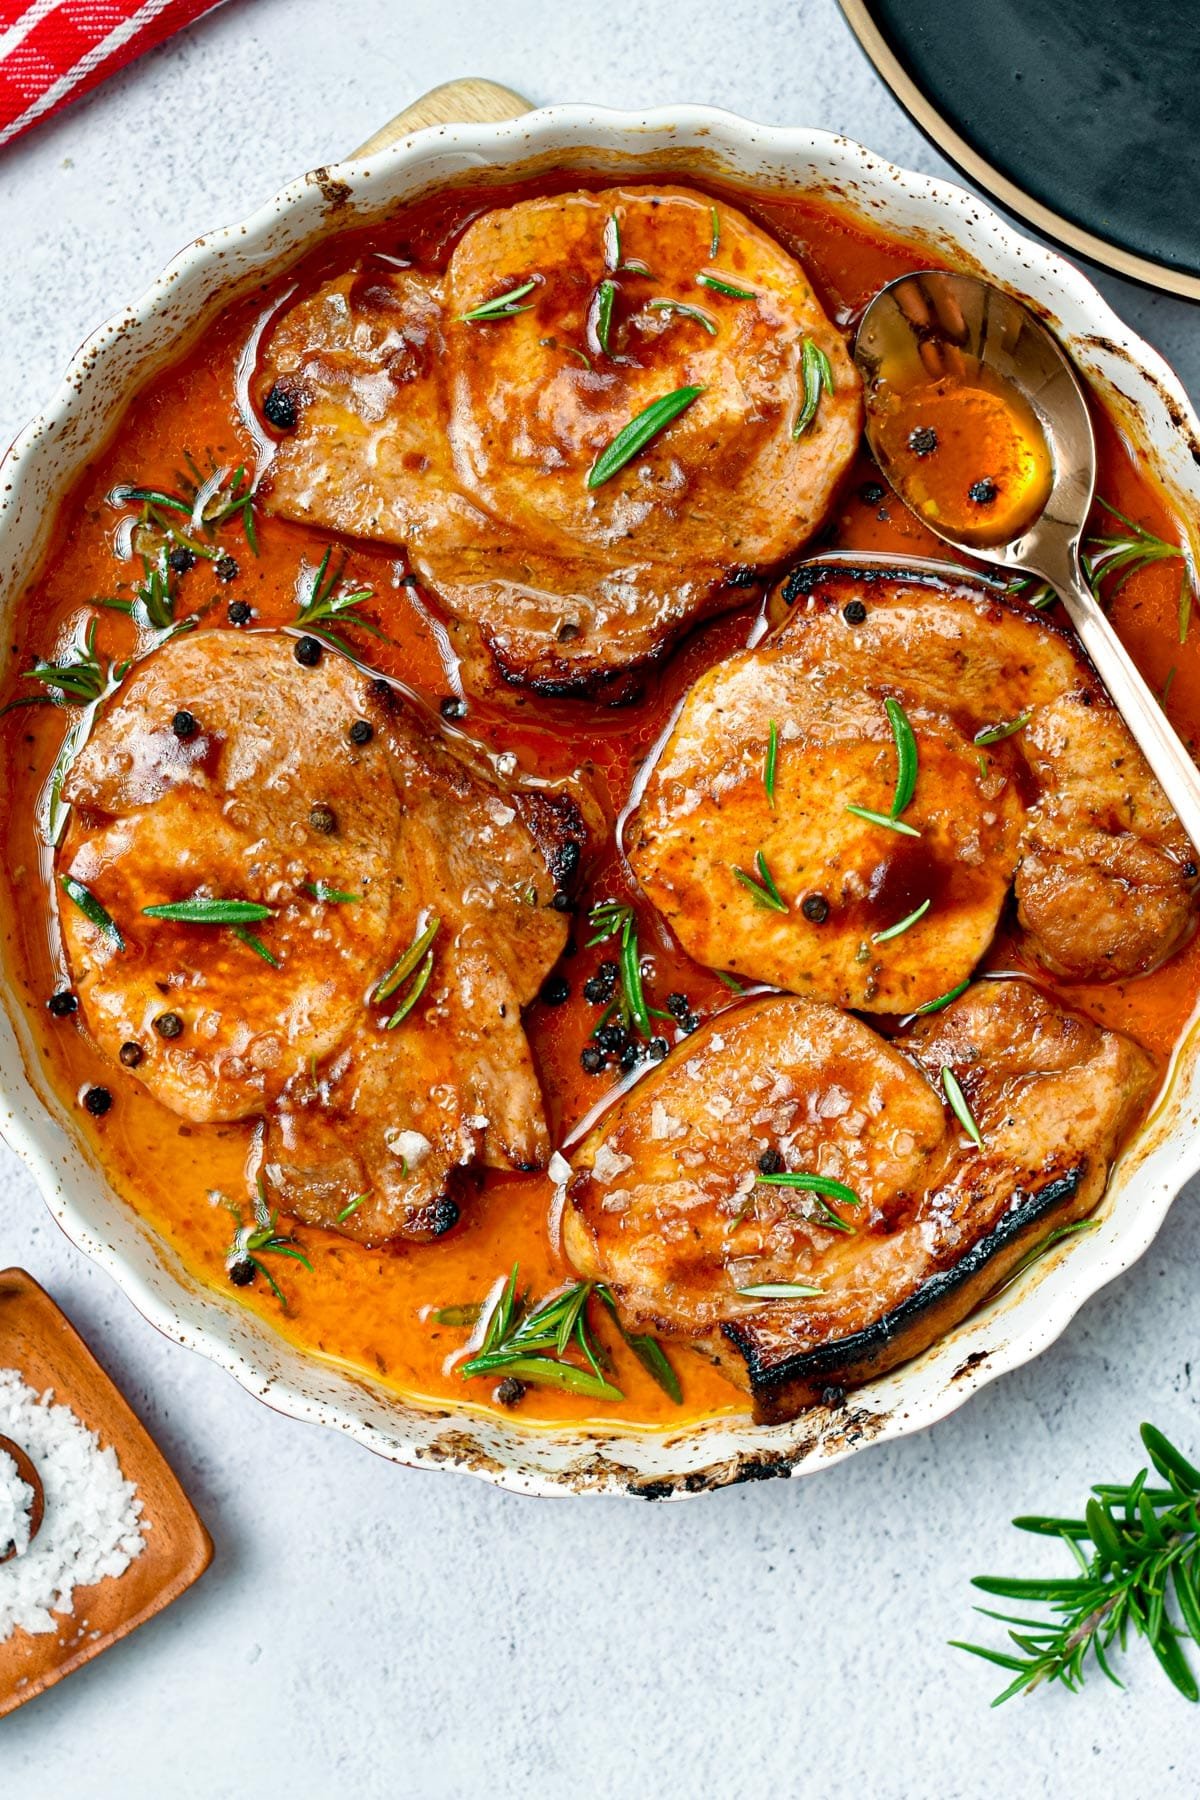 4 ingredient Oven Baked Pork Chops on a large baking dish, decorated with rosemary.